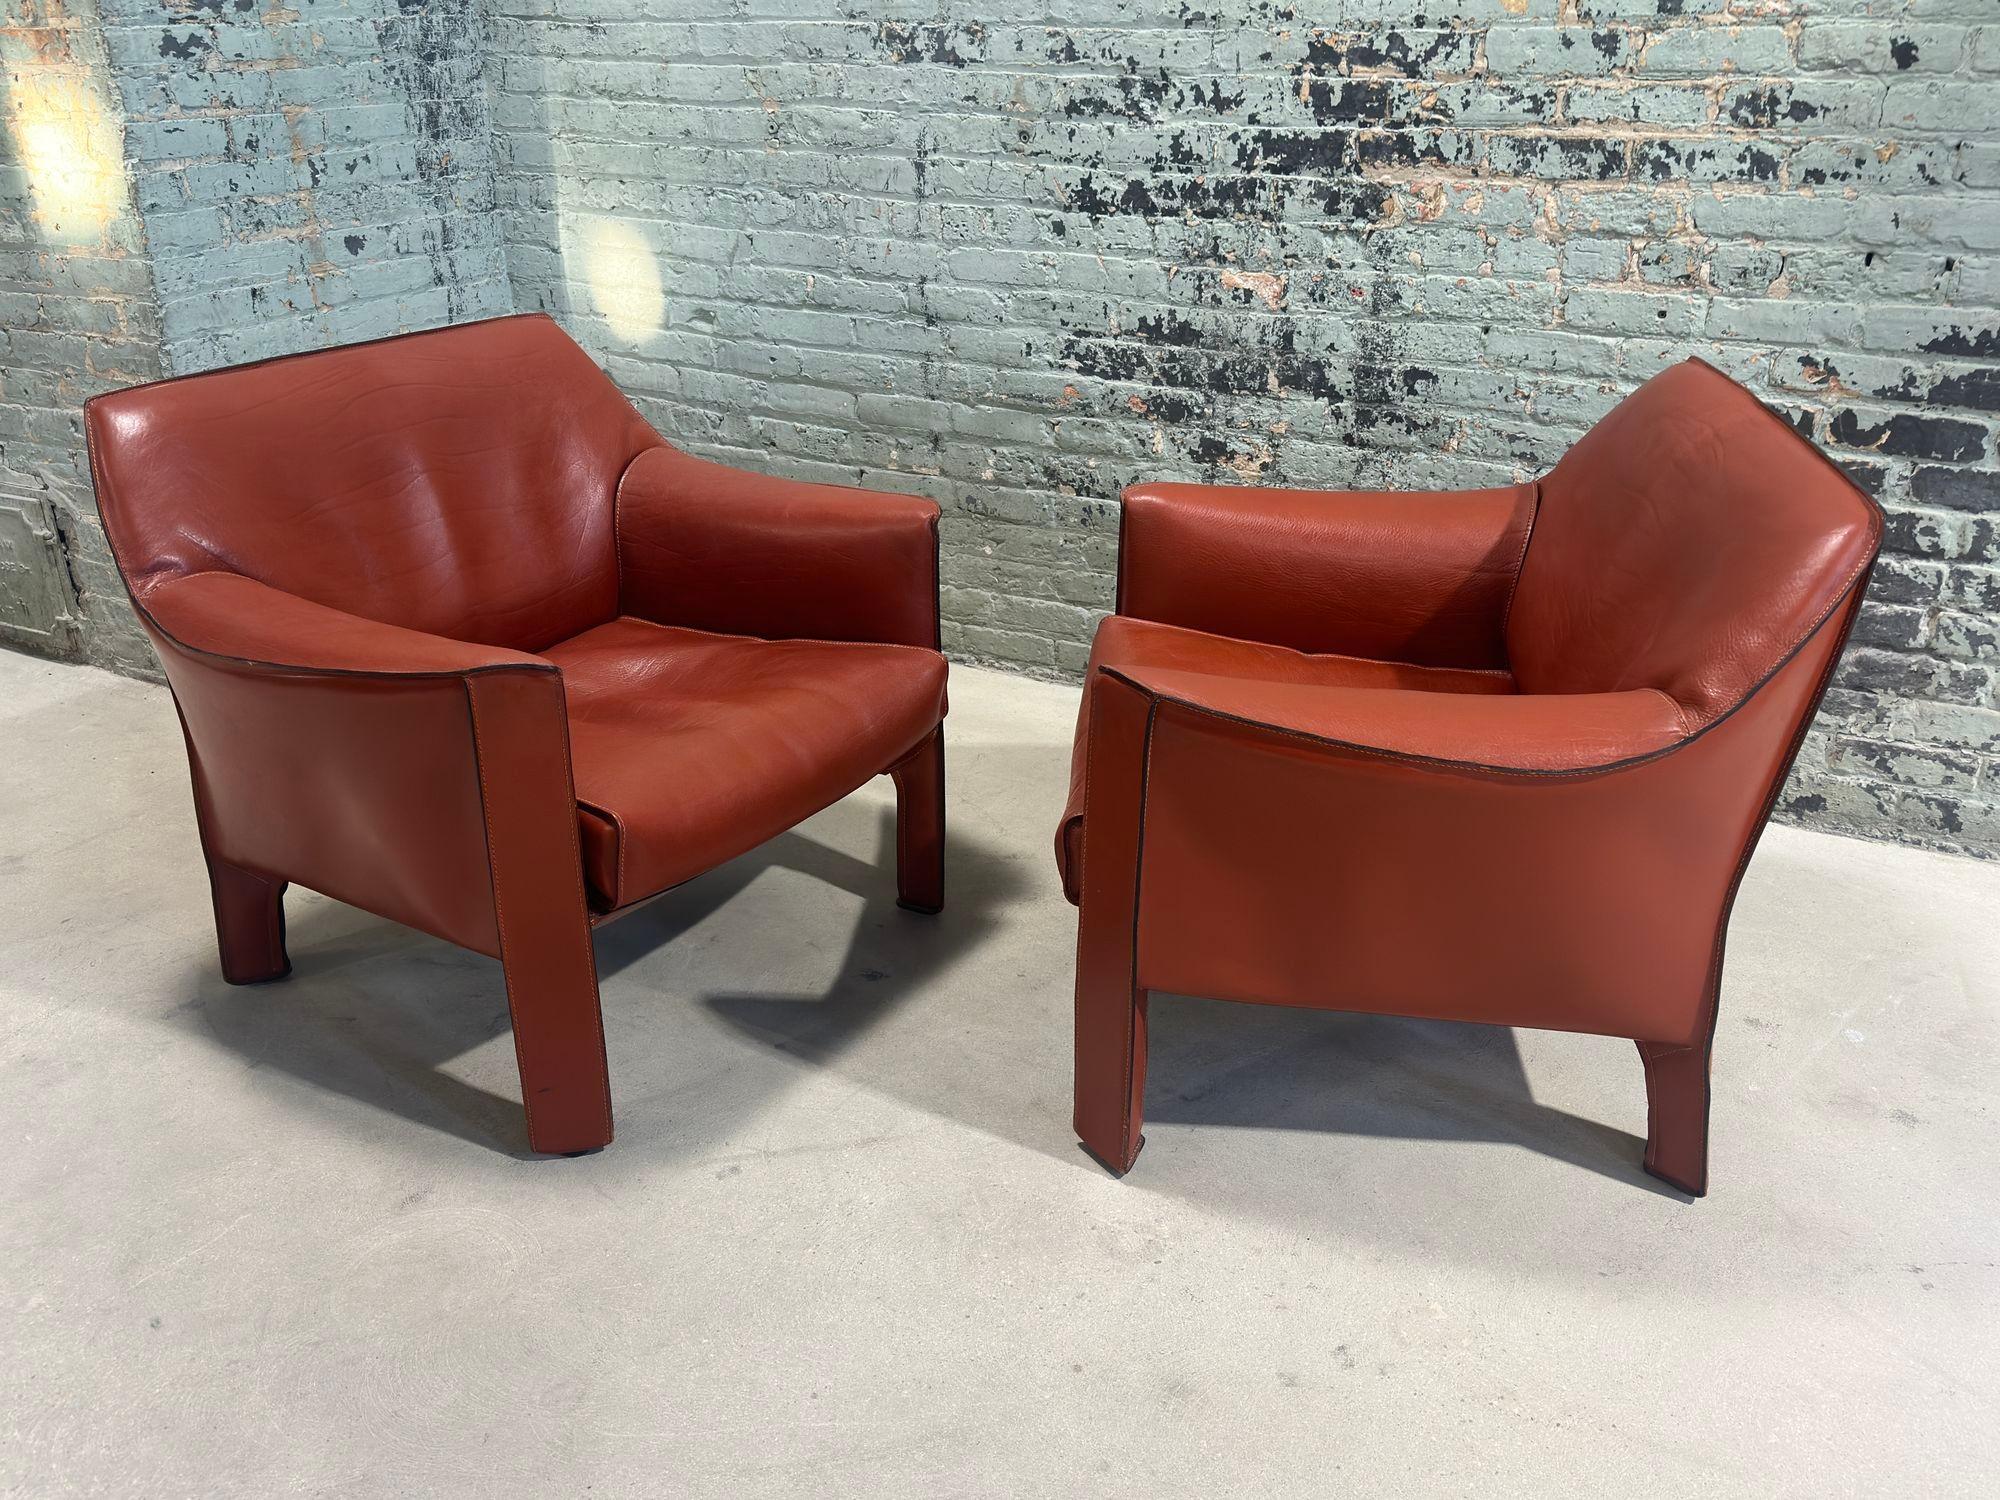 Mario Bellini Pair Leather Cab Lounge Chairs, Model 415, Italy 1970 In Good Condition For Sale In Chicago, IL